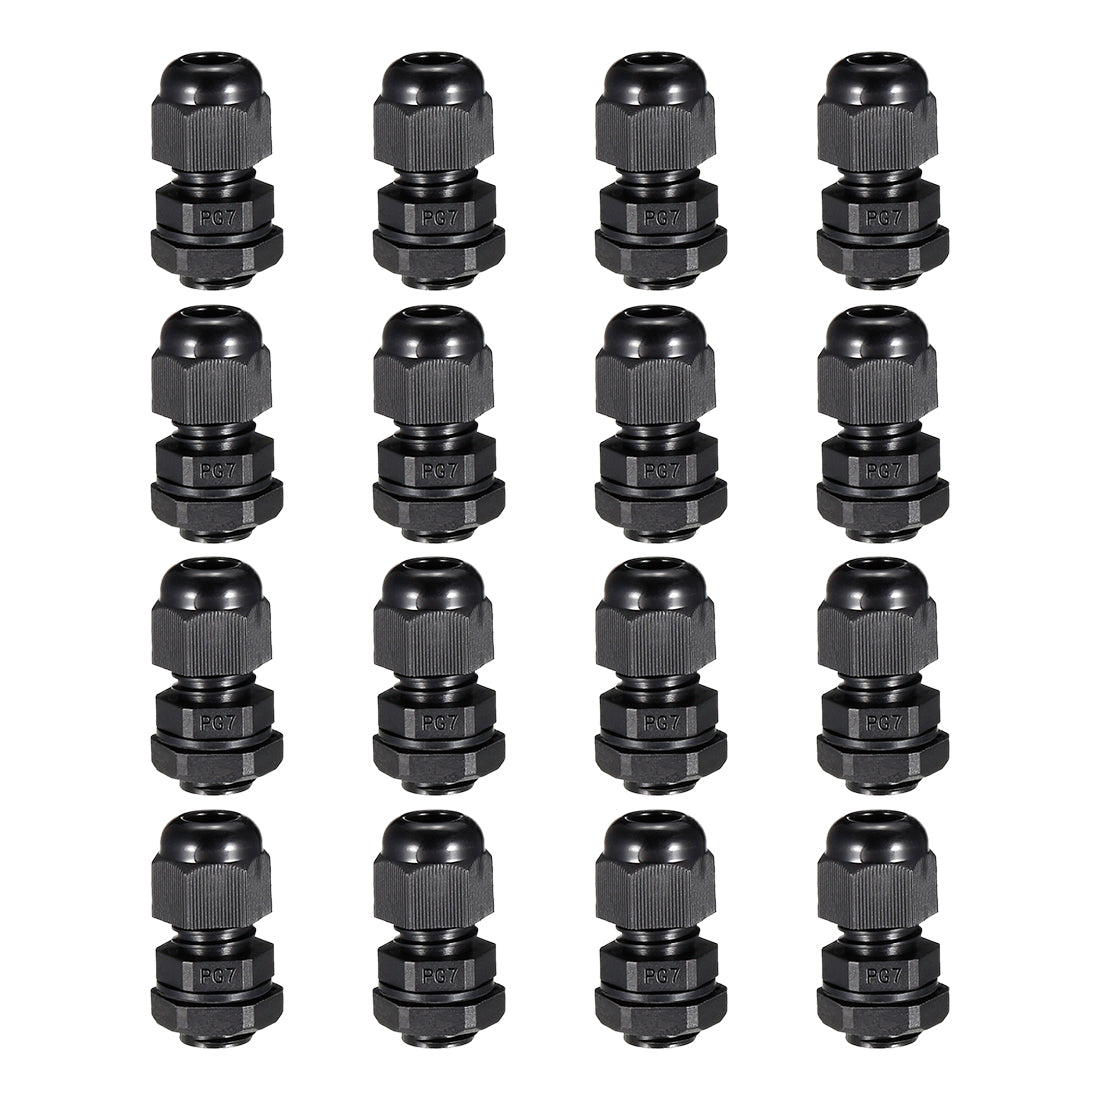 uxcell Uxcell 16Pcs PG7 Cable Gland Waterproof Plastic Joint Adjustable Locknut Black with Washers for 3mm-6.5mm Dia Cable Wire